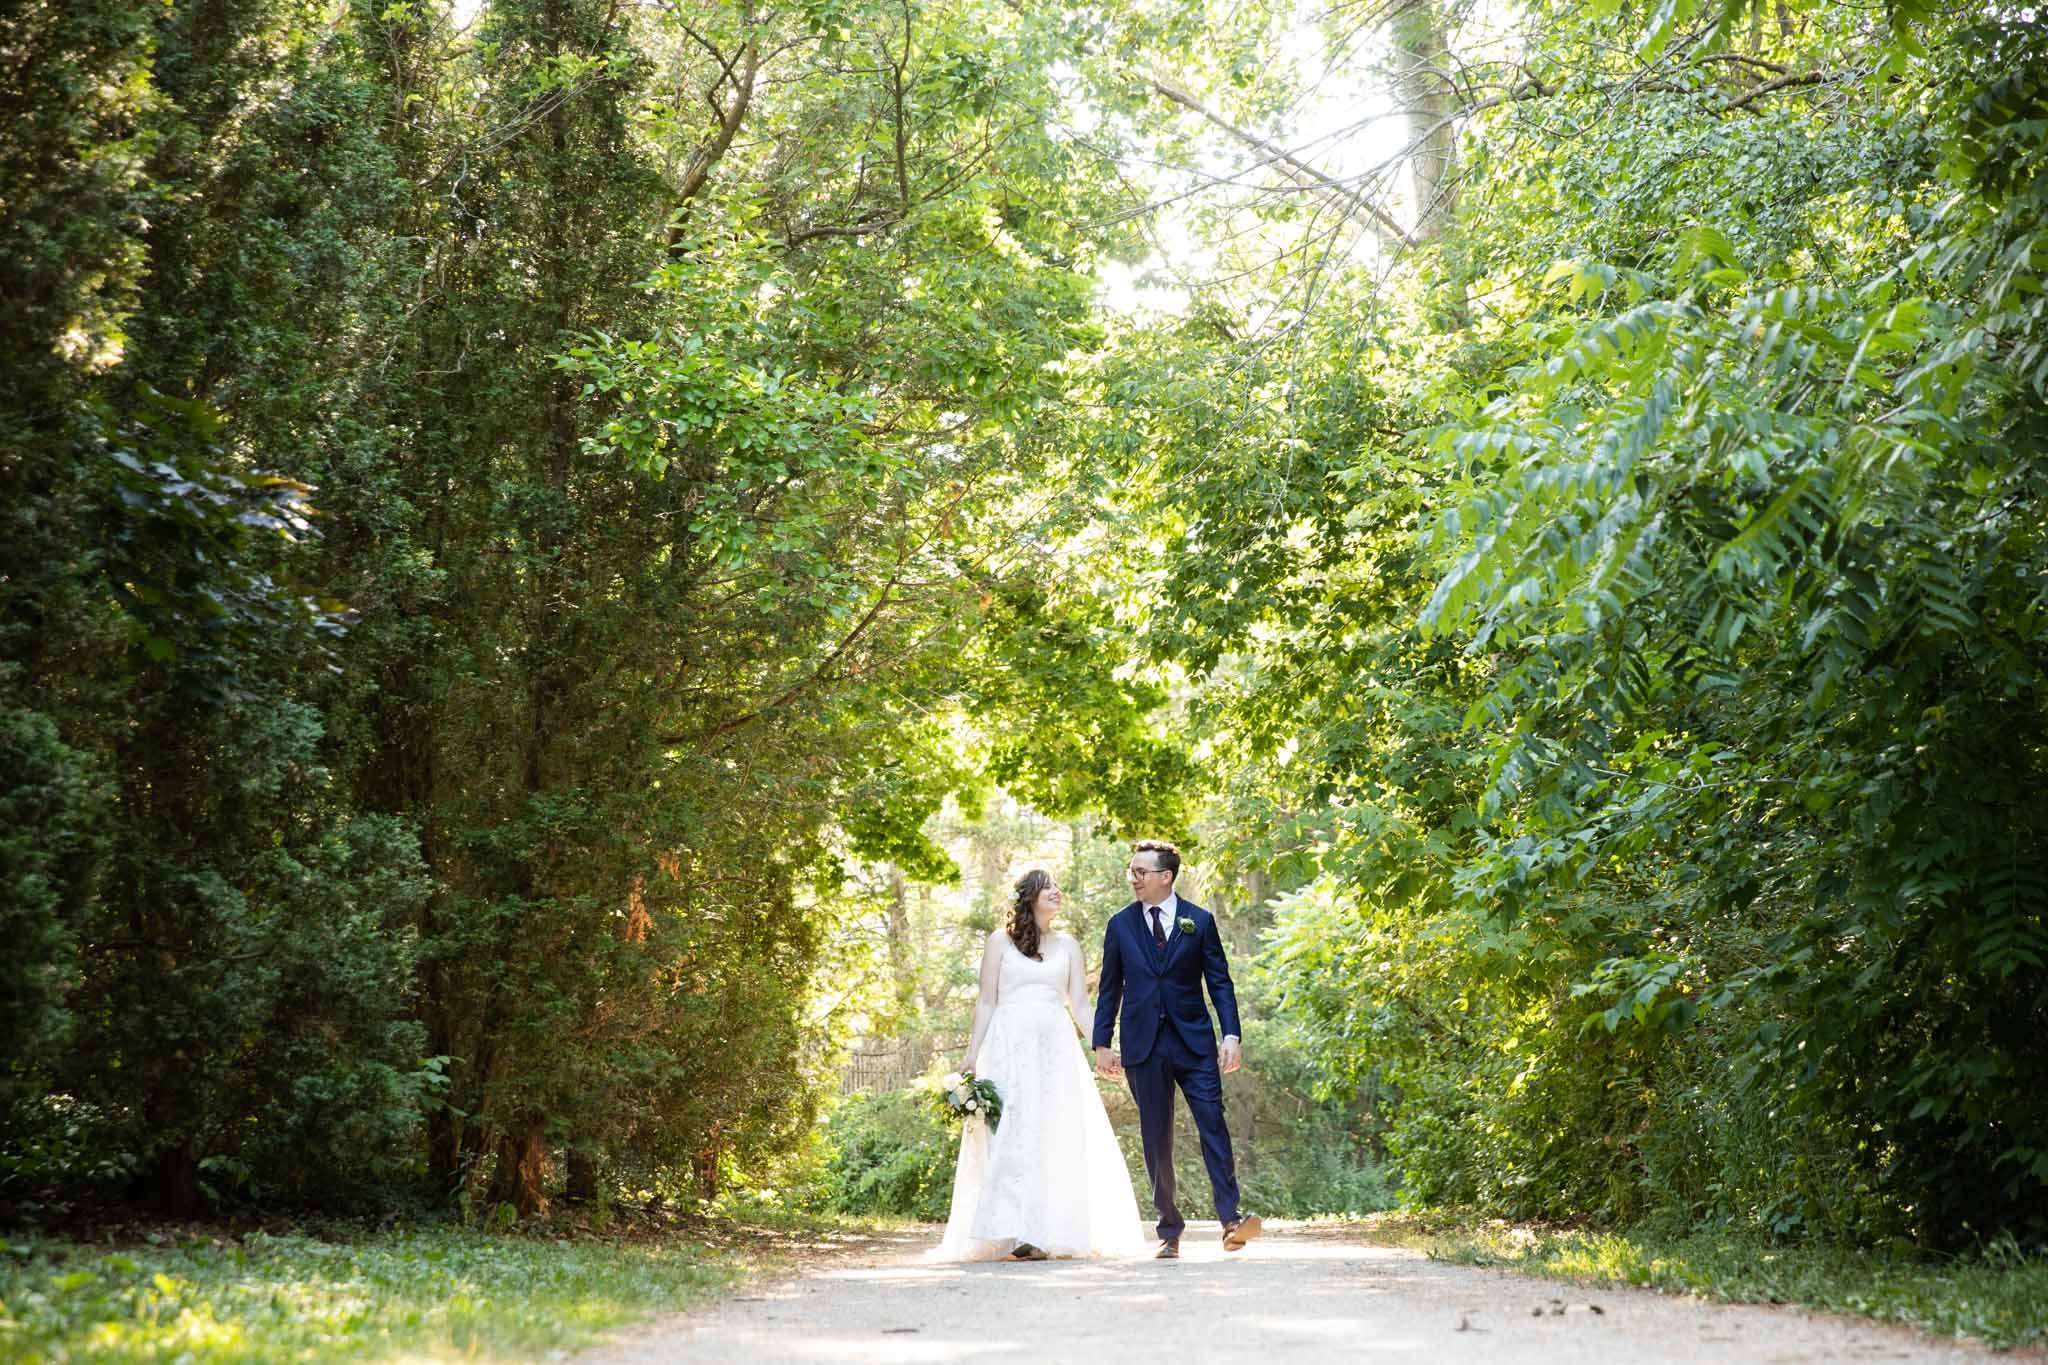 wedding couple holding hands walking on a path in a park.jpg